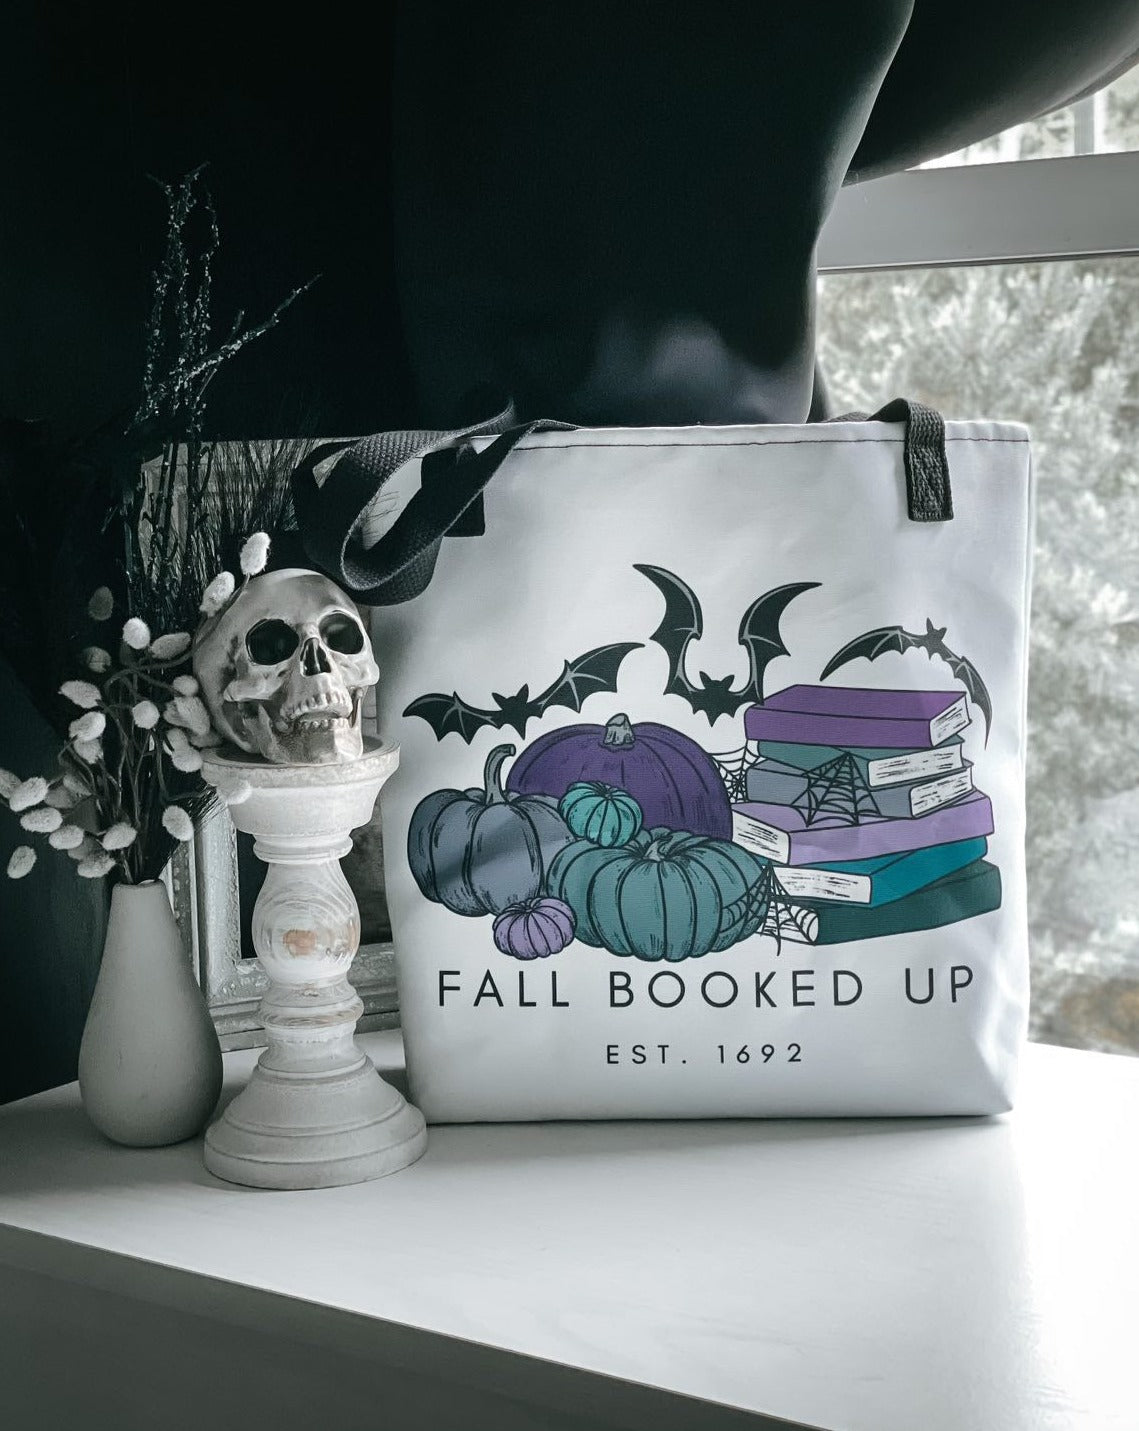 Fall Booked Up Tote in purple turquise, and black on white canvas tote bag with black handles. FireDrake Artistry ™